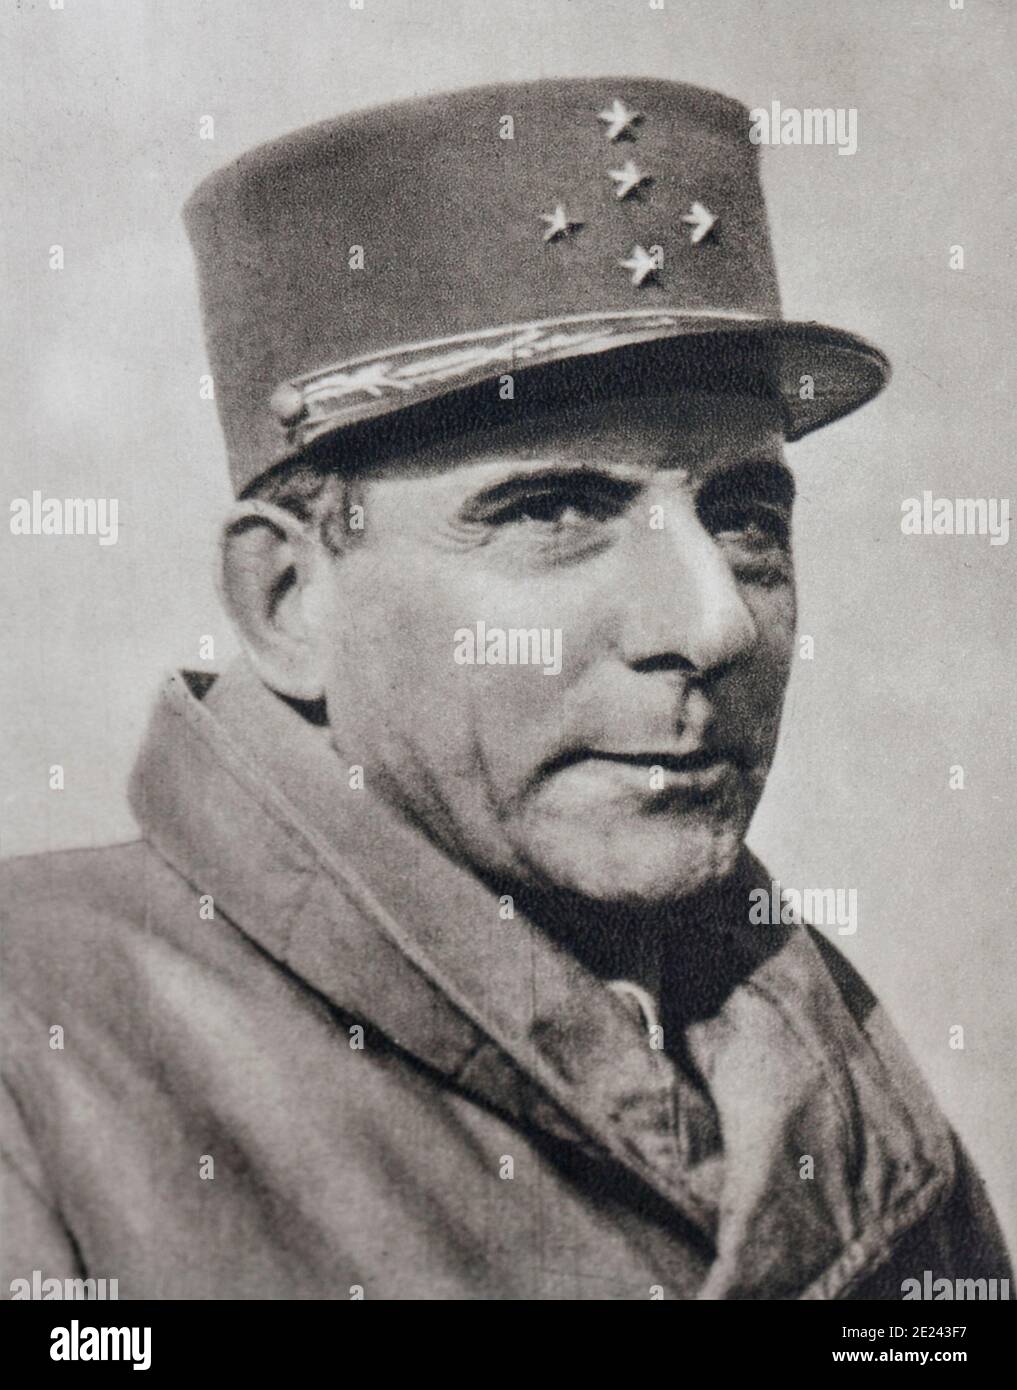 Jean de Lattre de Tassigny, (1889 – 1952). Commander of the first French army that landed in Provence. Stock Photo